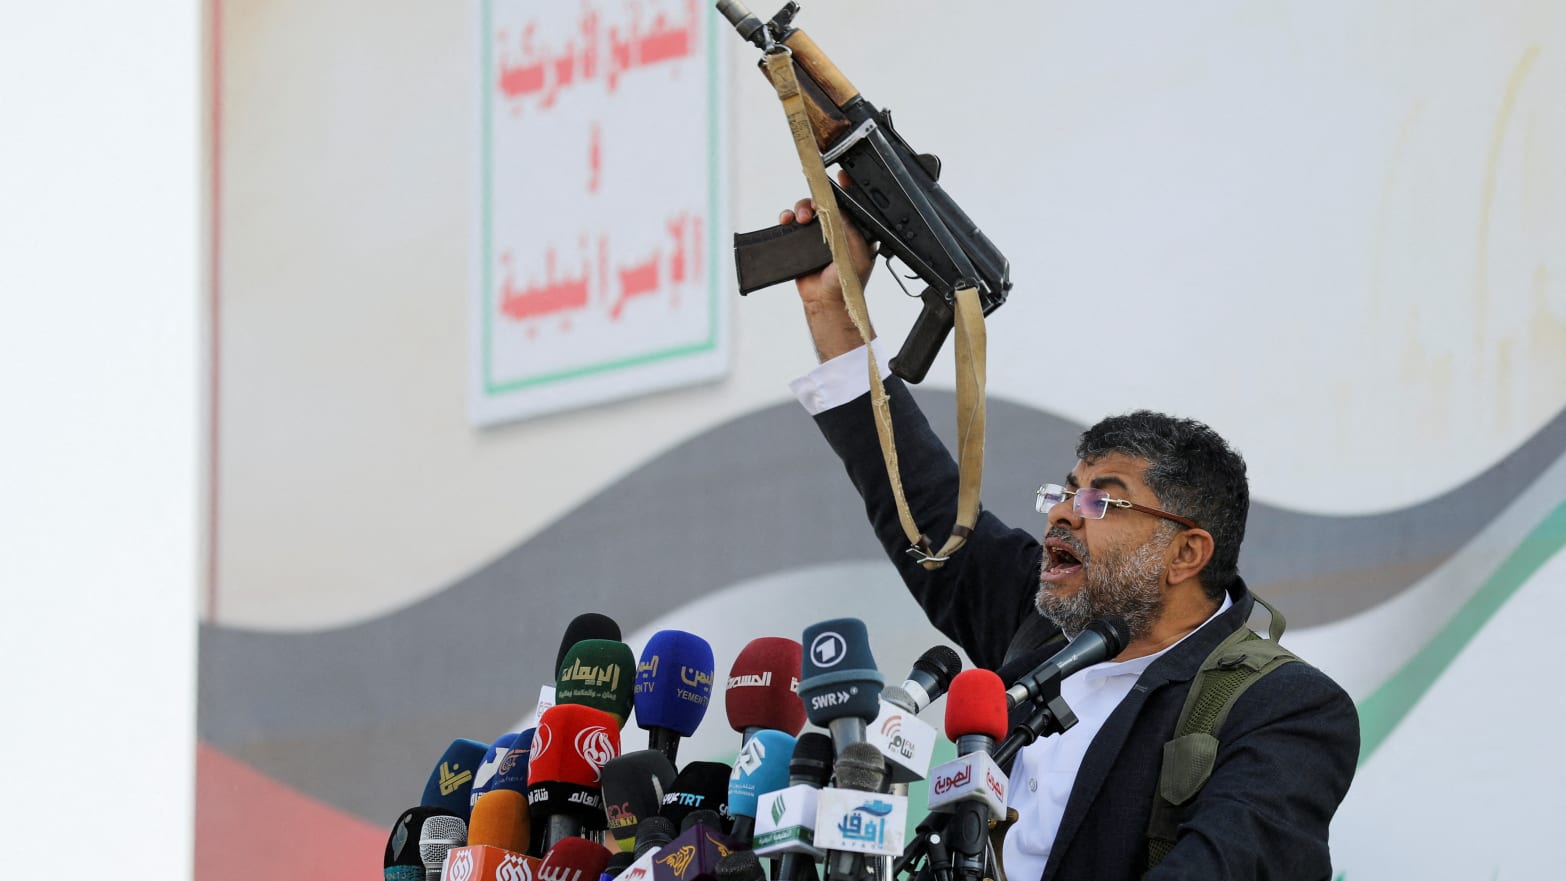 Mohammed Ali al-Houthi, a member of the Houthi supreme political council, speaks while holding a gun, as supporters of the Houthi movement rally to denounce air strikes launched by the U.S. and Britain on Houthi targets, in Sanaa, Yemen